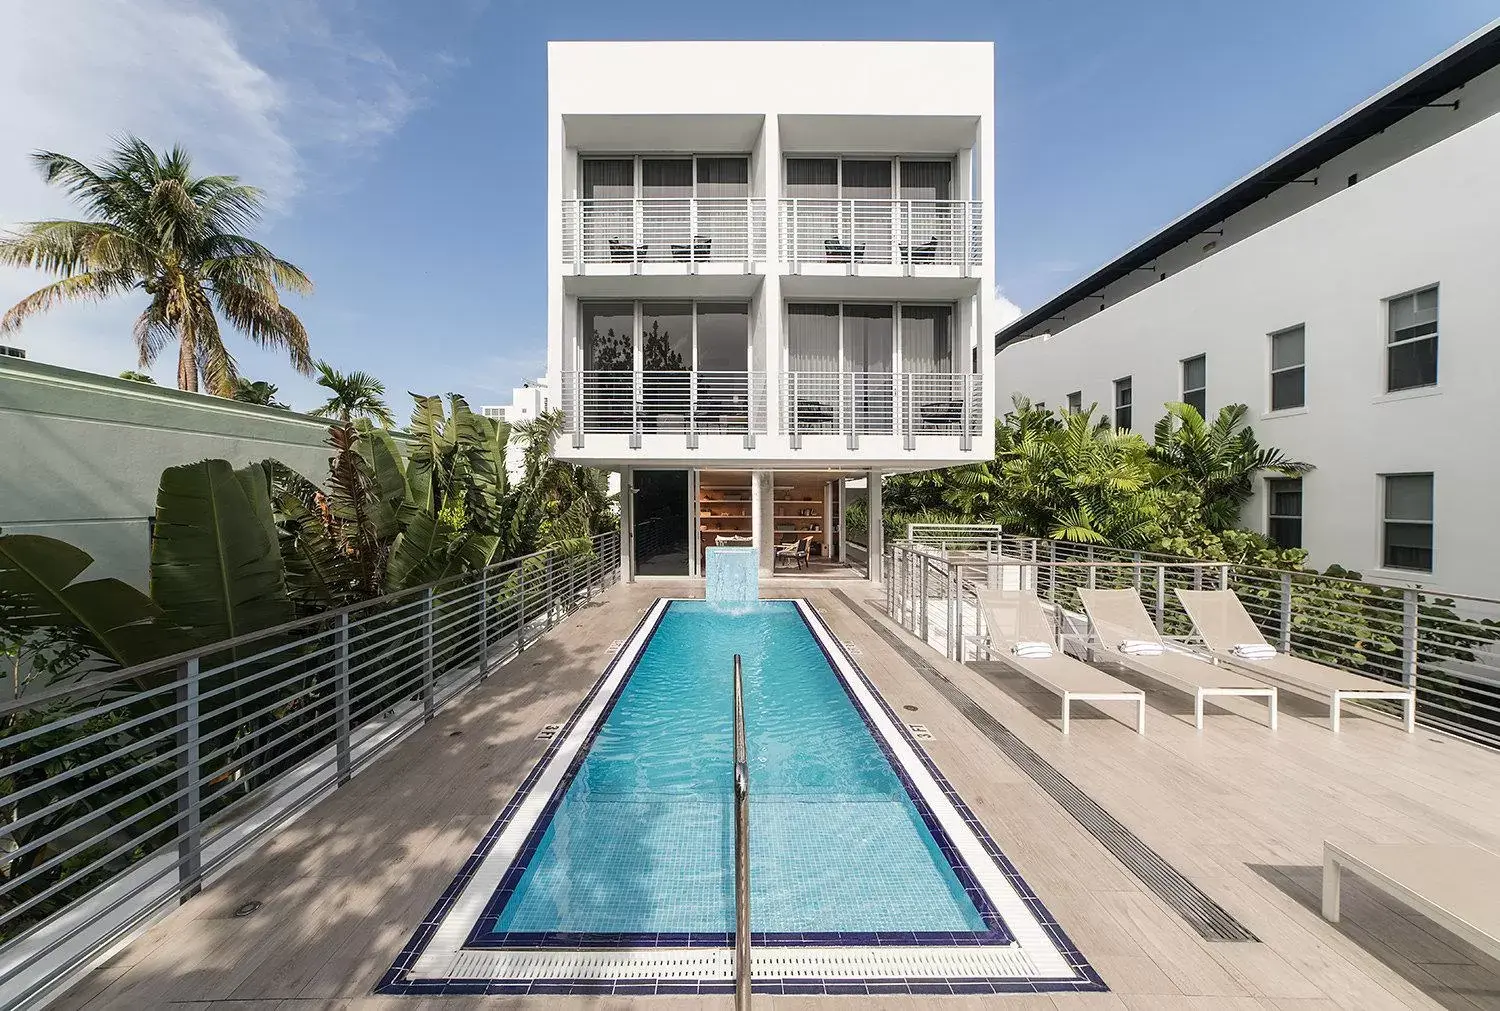 Property building, Swimming Pool in The Meridian Hotel Miami Beach